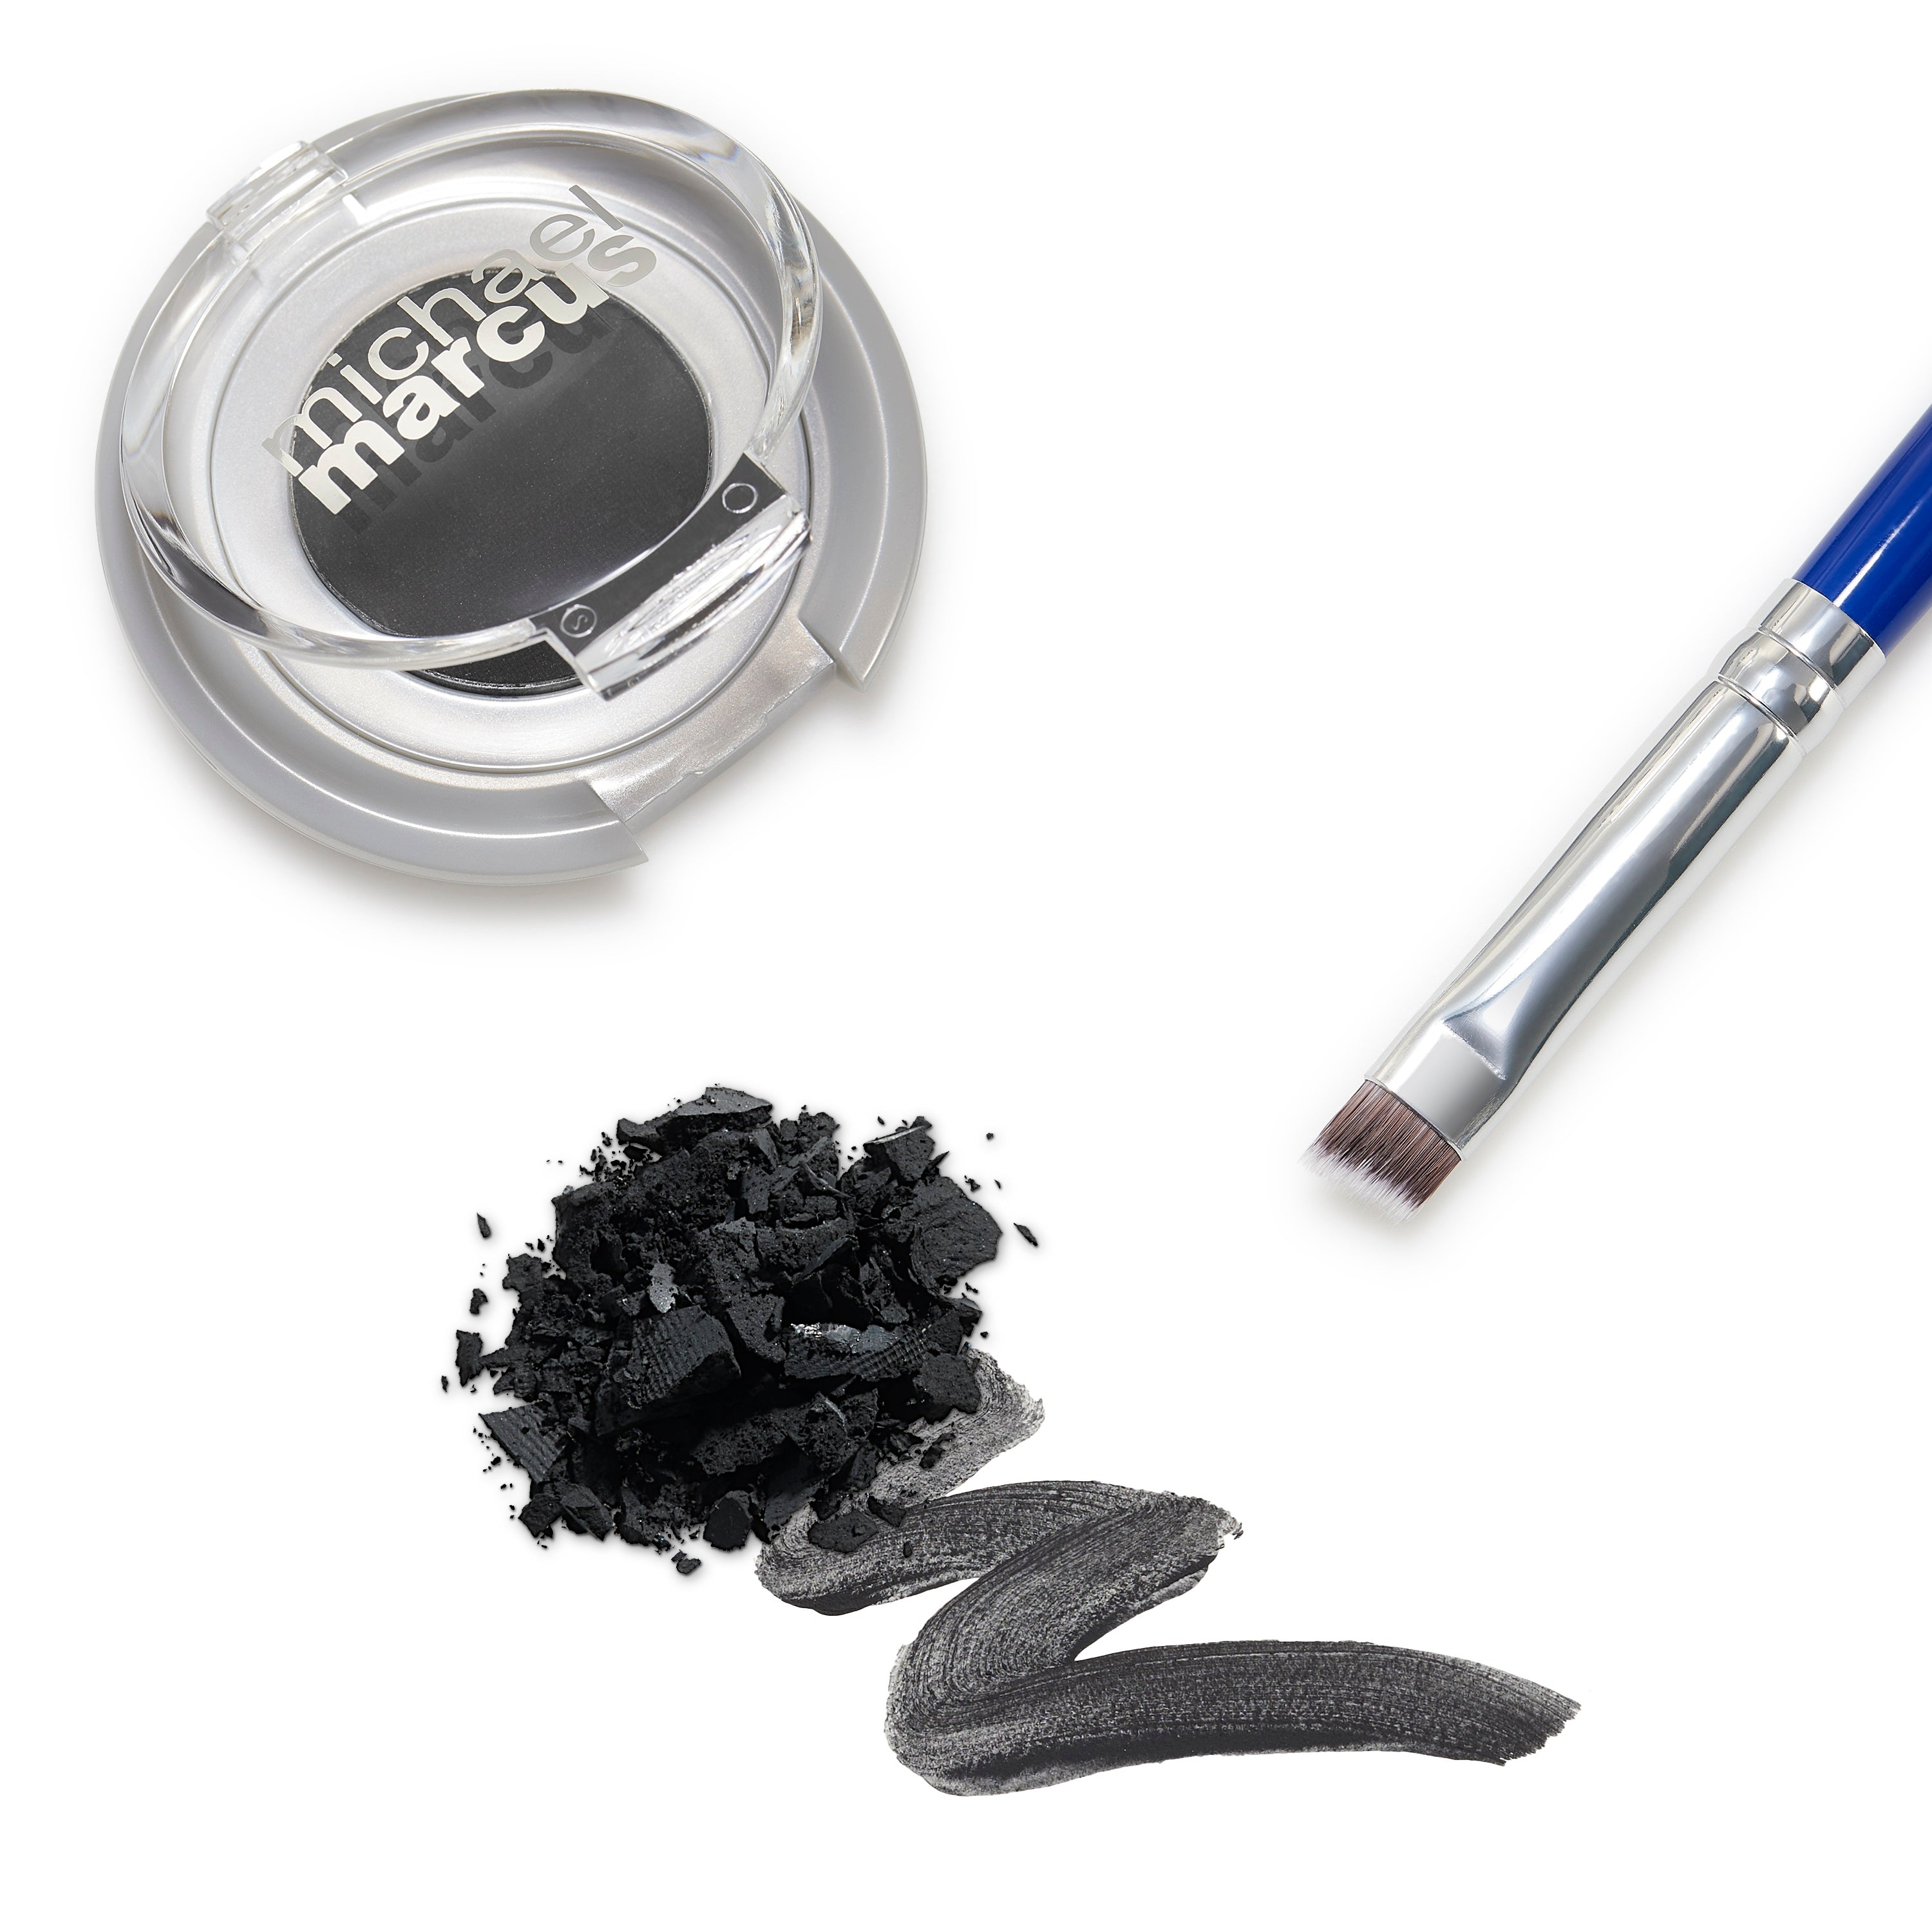 The 12 Best Eyeliners for Oily Lids